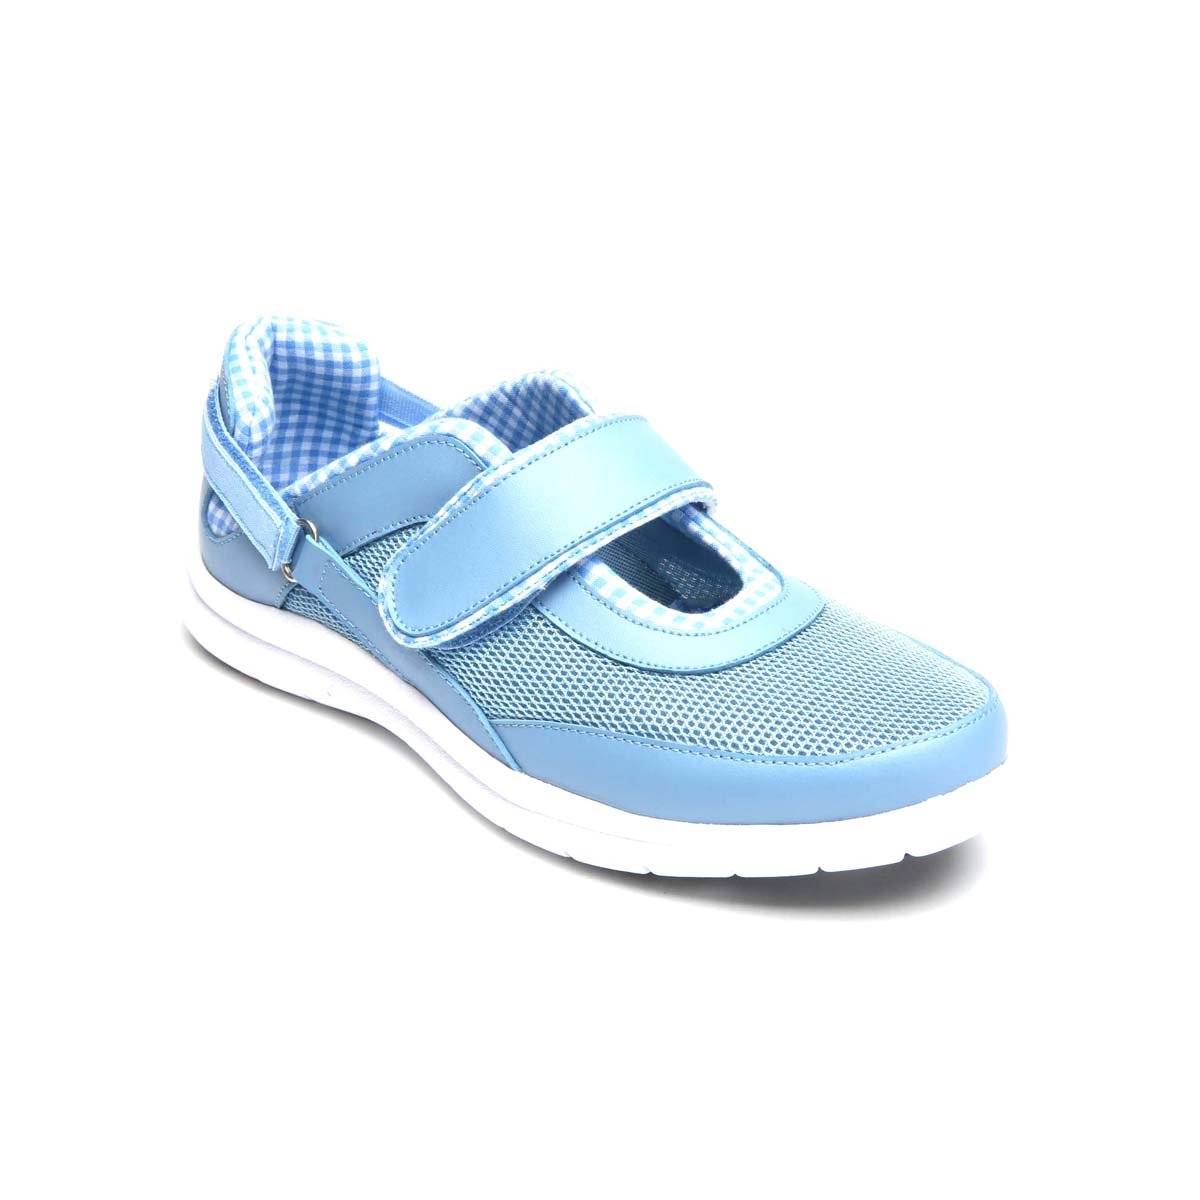 BELLINI FUN WOMEN CASUAL SLIP-ON SHOES IN LT BLUE LEATHER - TLW Shoes